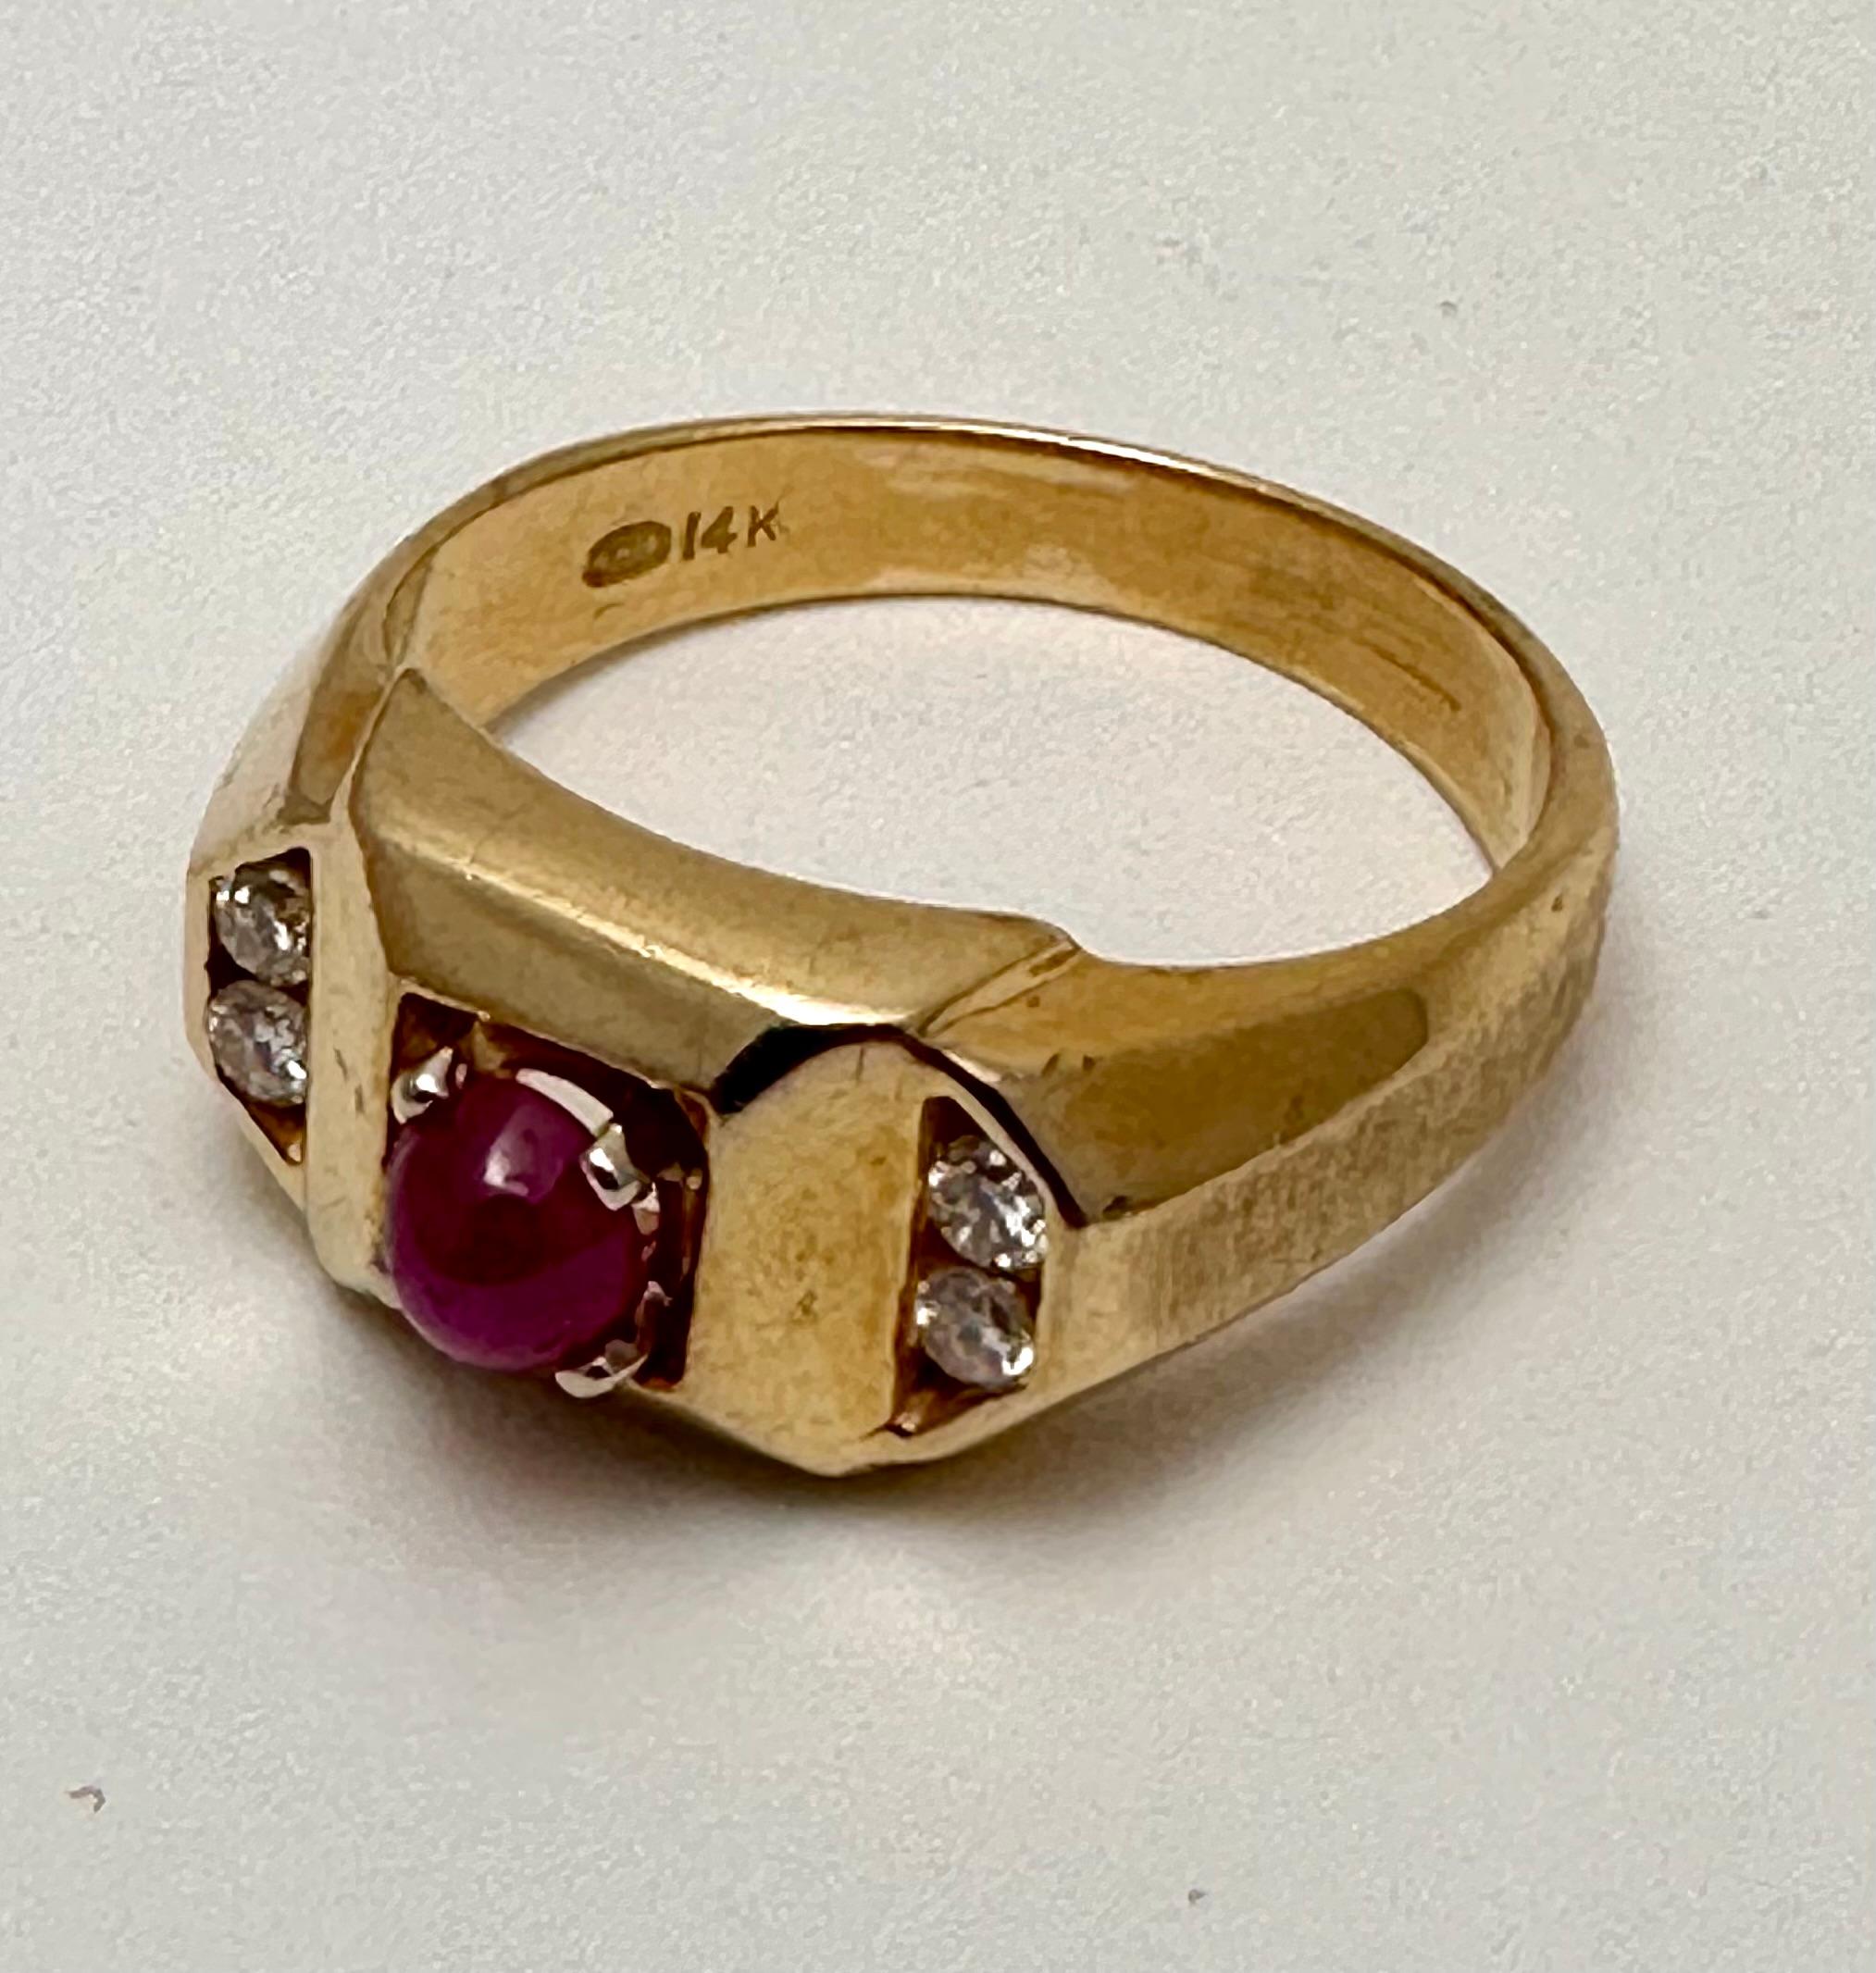 14k Yellow Gold 5mm Cabochon Ruby with 4 Round Diamonds Ring Size 9 1/2 For Sale 2